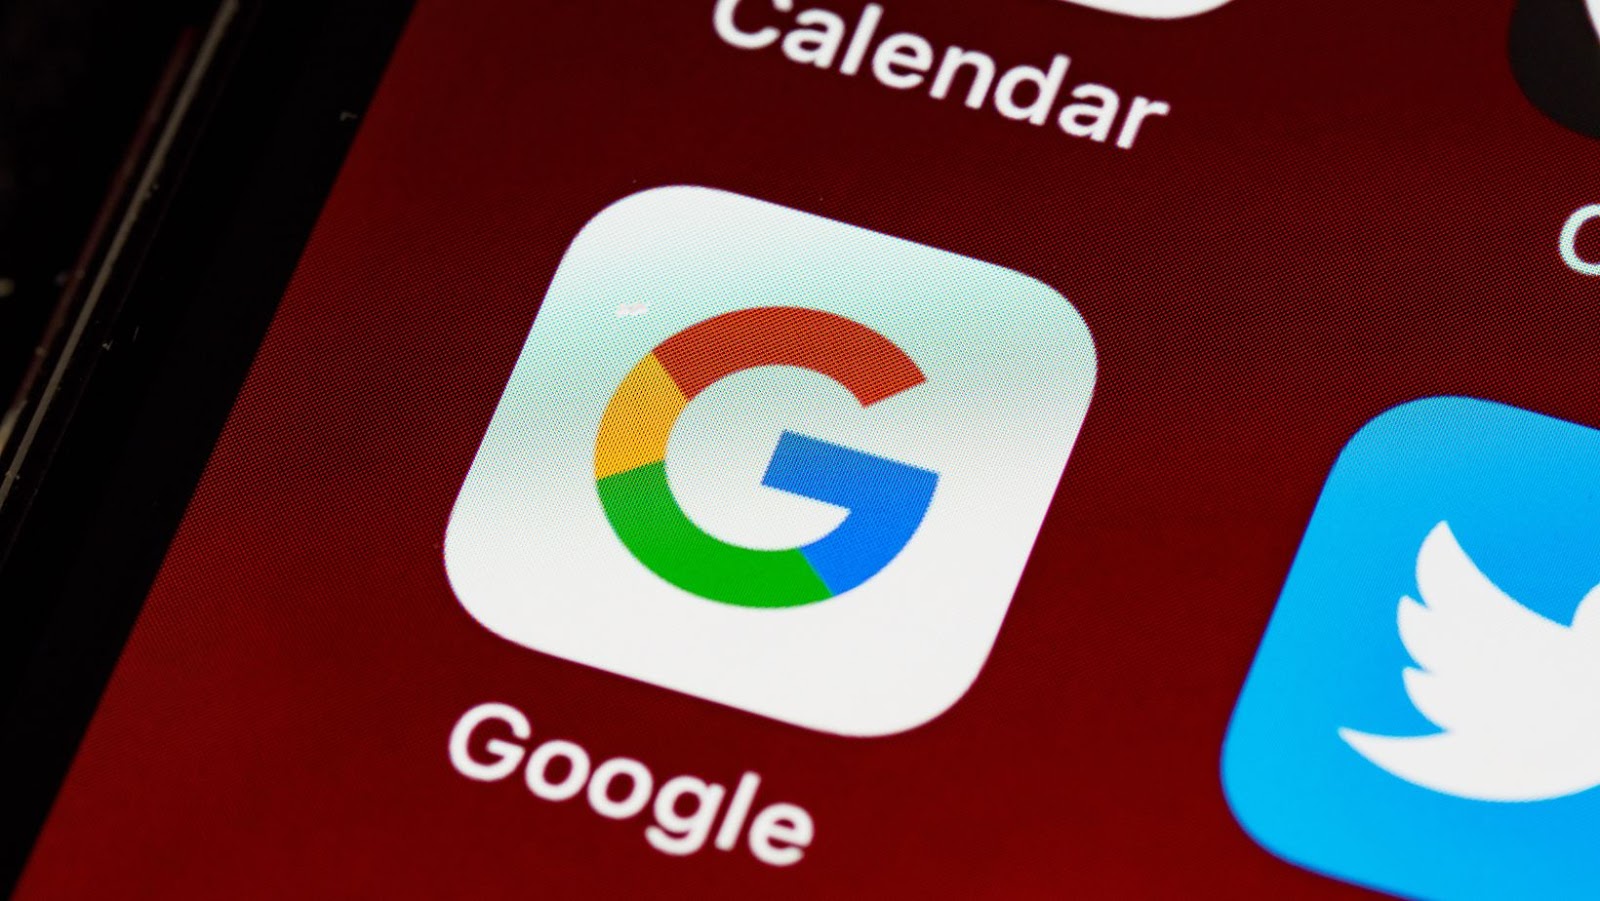 How to Add Google to Your Home Screen in Seconds